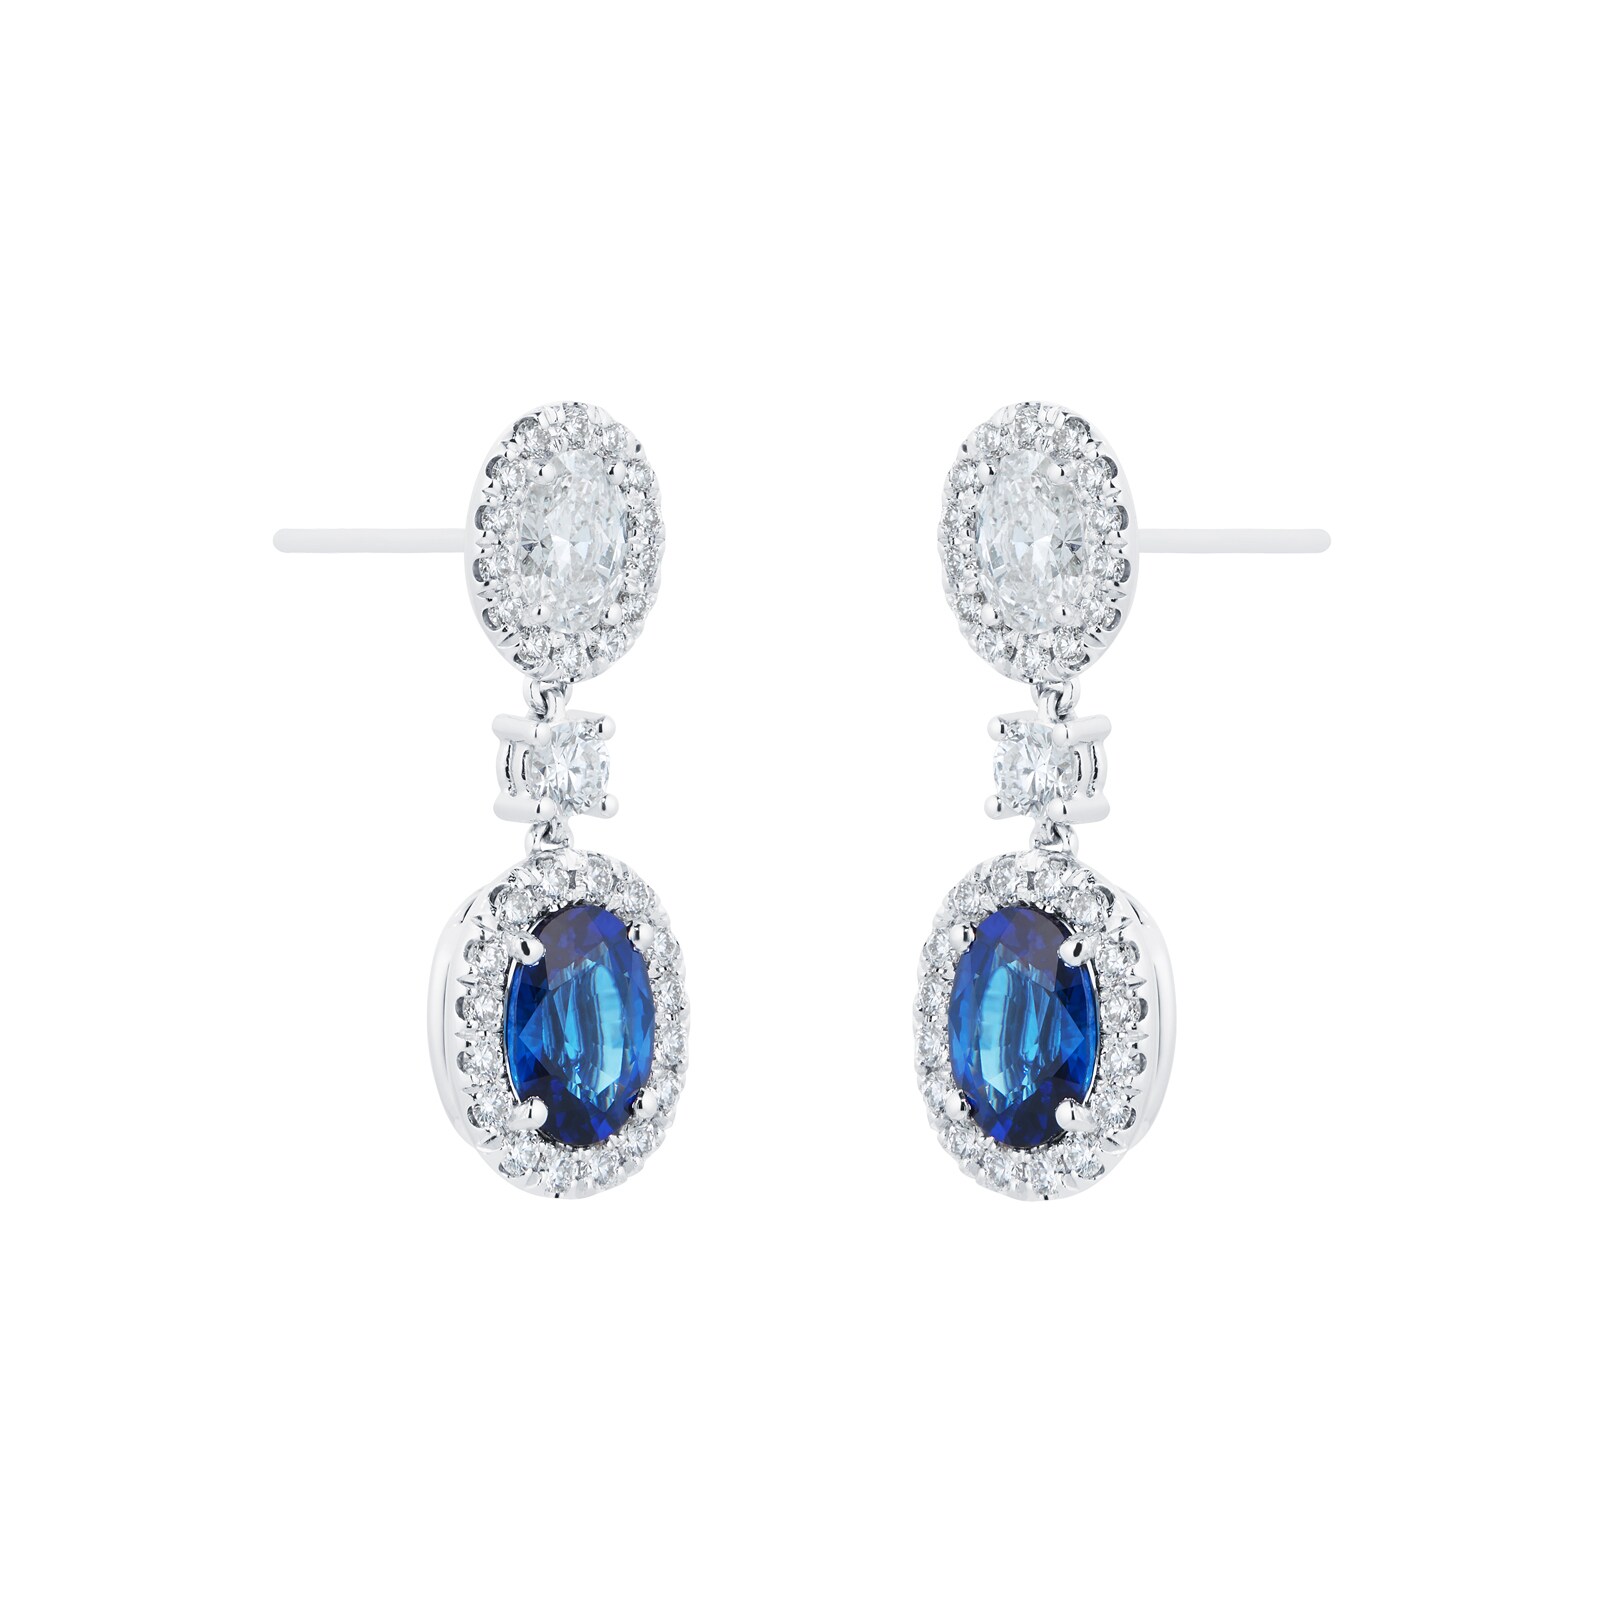 18ct White Gold Oval Cut Sapphire and Diamond Drop Earrings